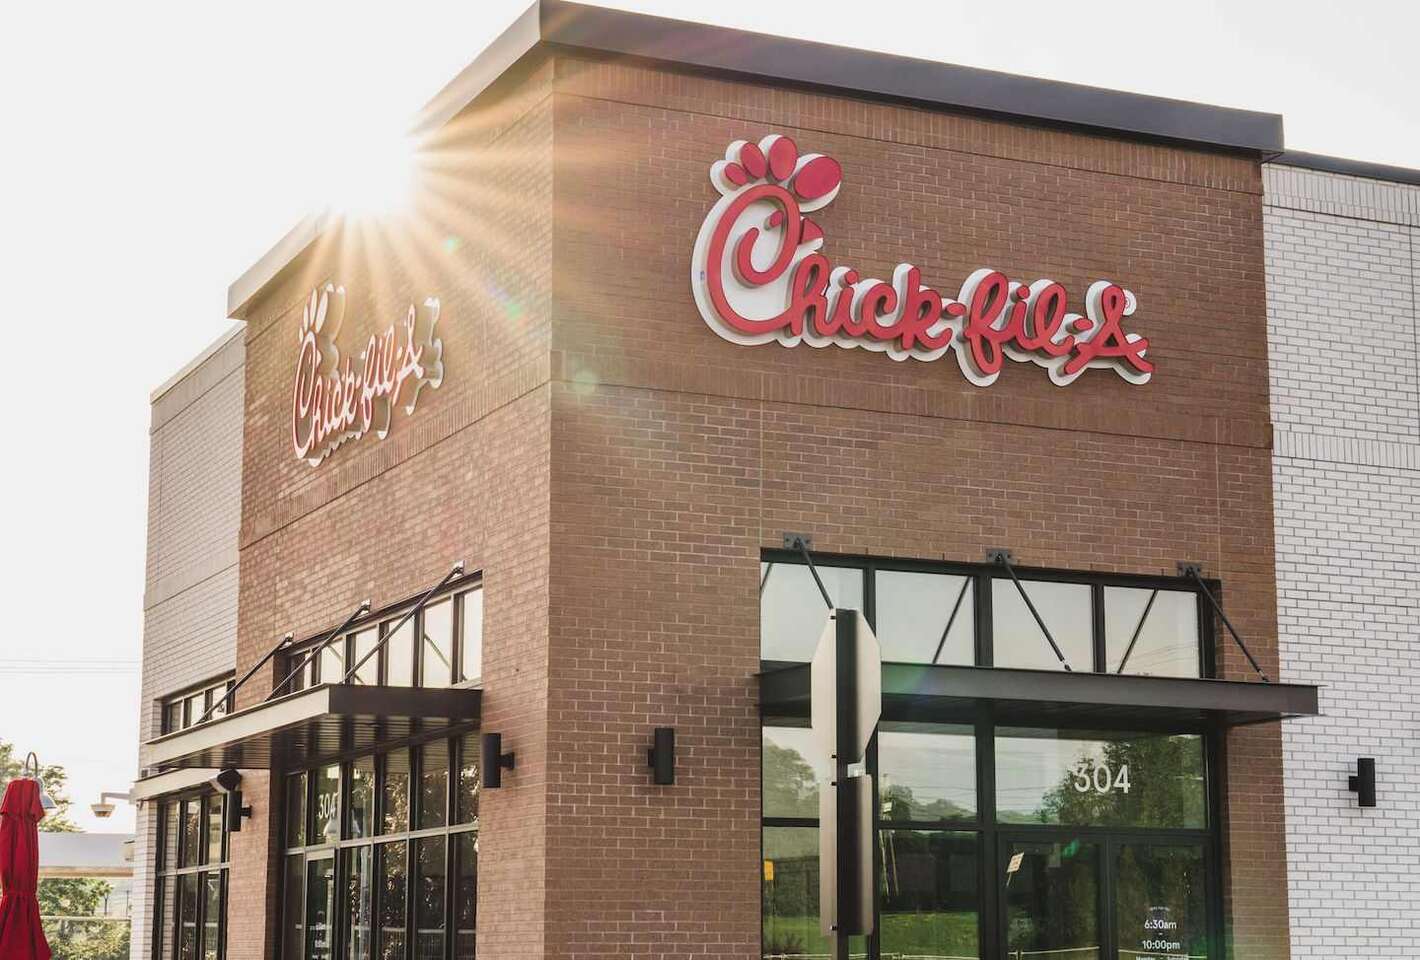 The exterior of a brick Chick-fil-A restaurant during the daytime.